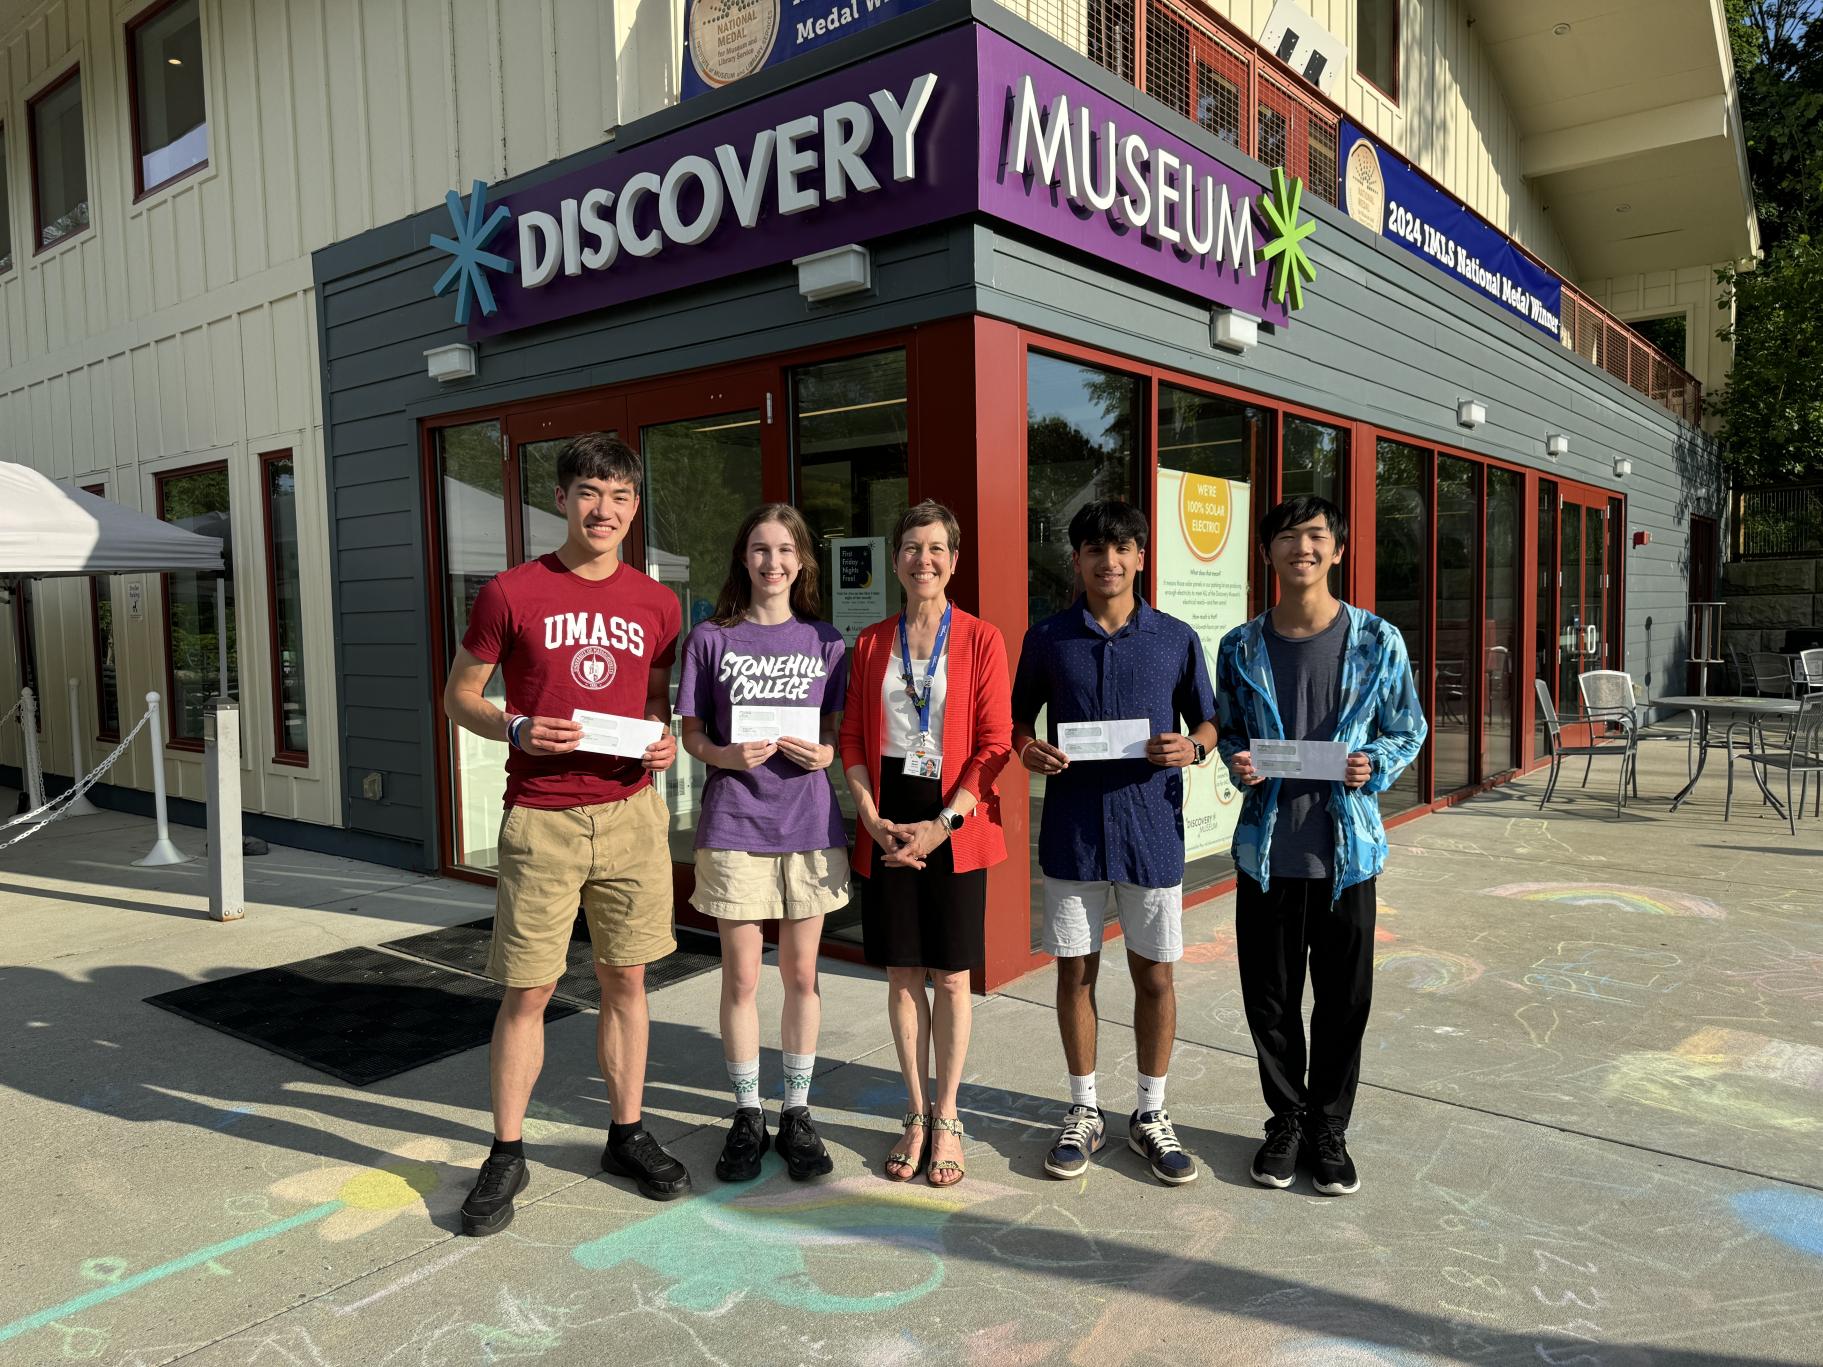 five people stand in front of a museum entrance, four are holding white envelopes